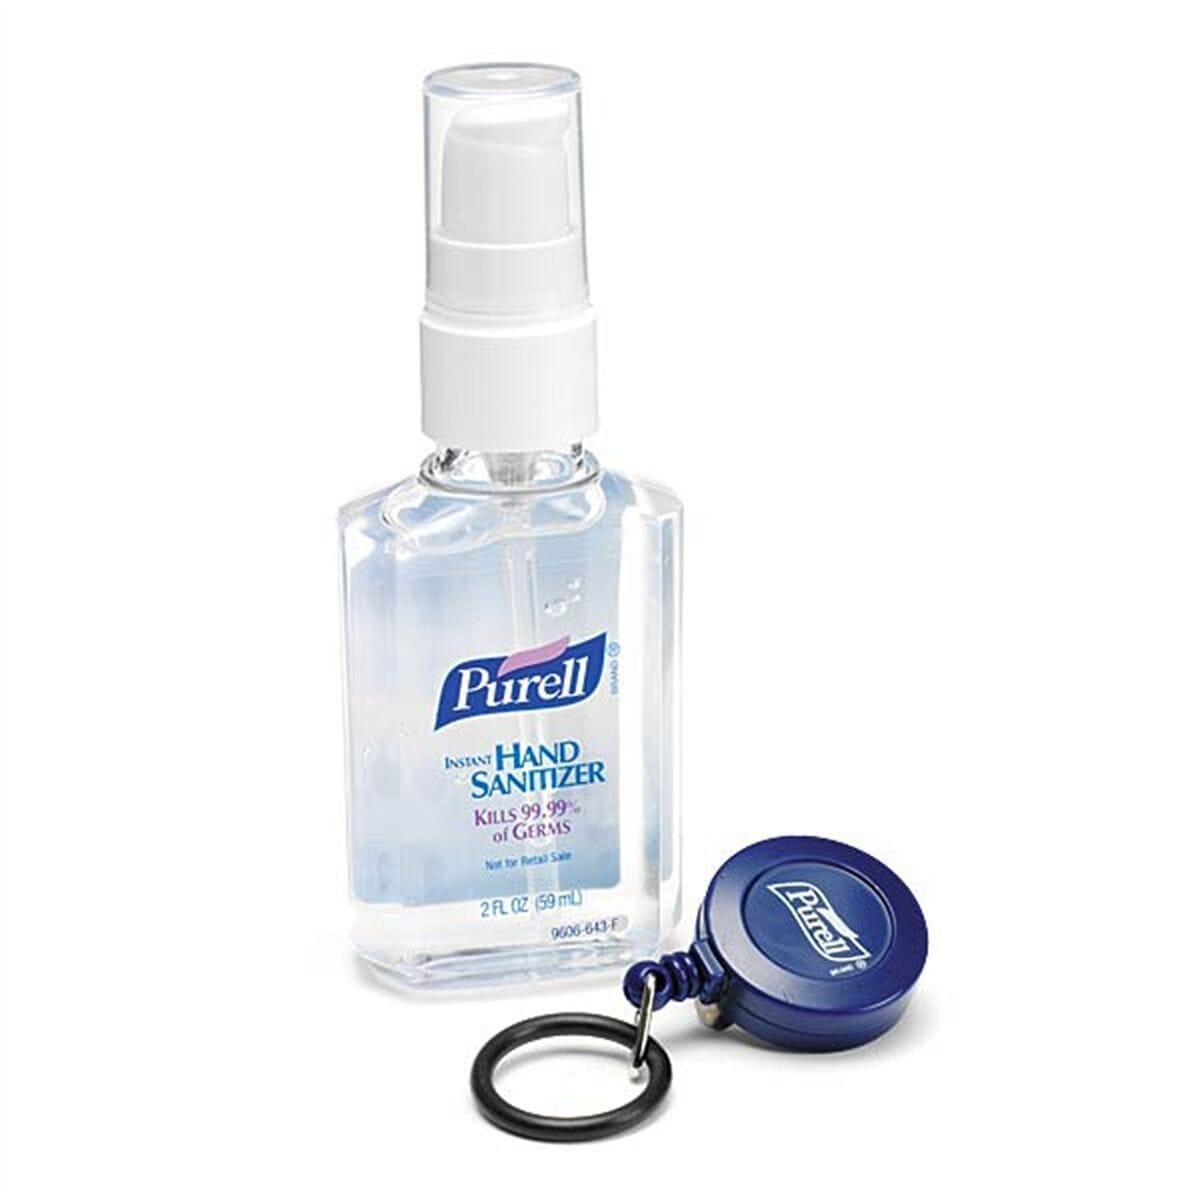 View Purell Personal Hand Sanitiser Bottle And Belt Clip information